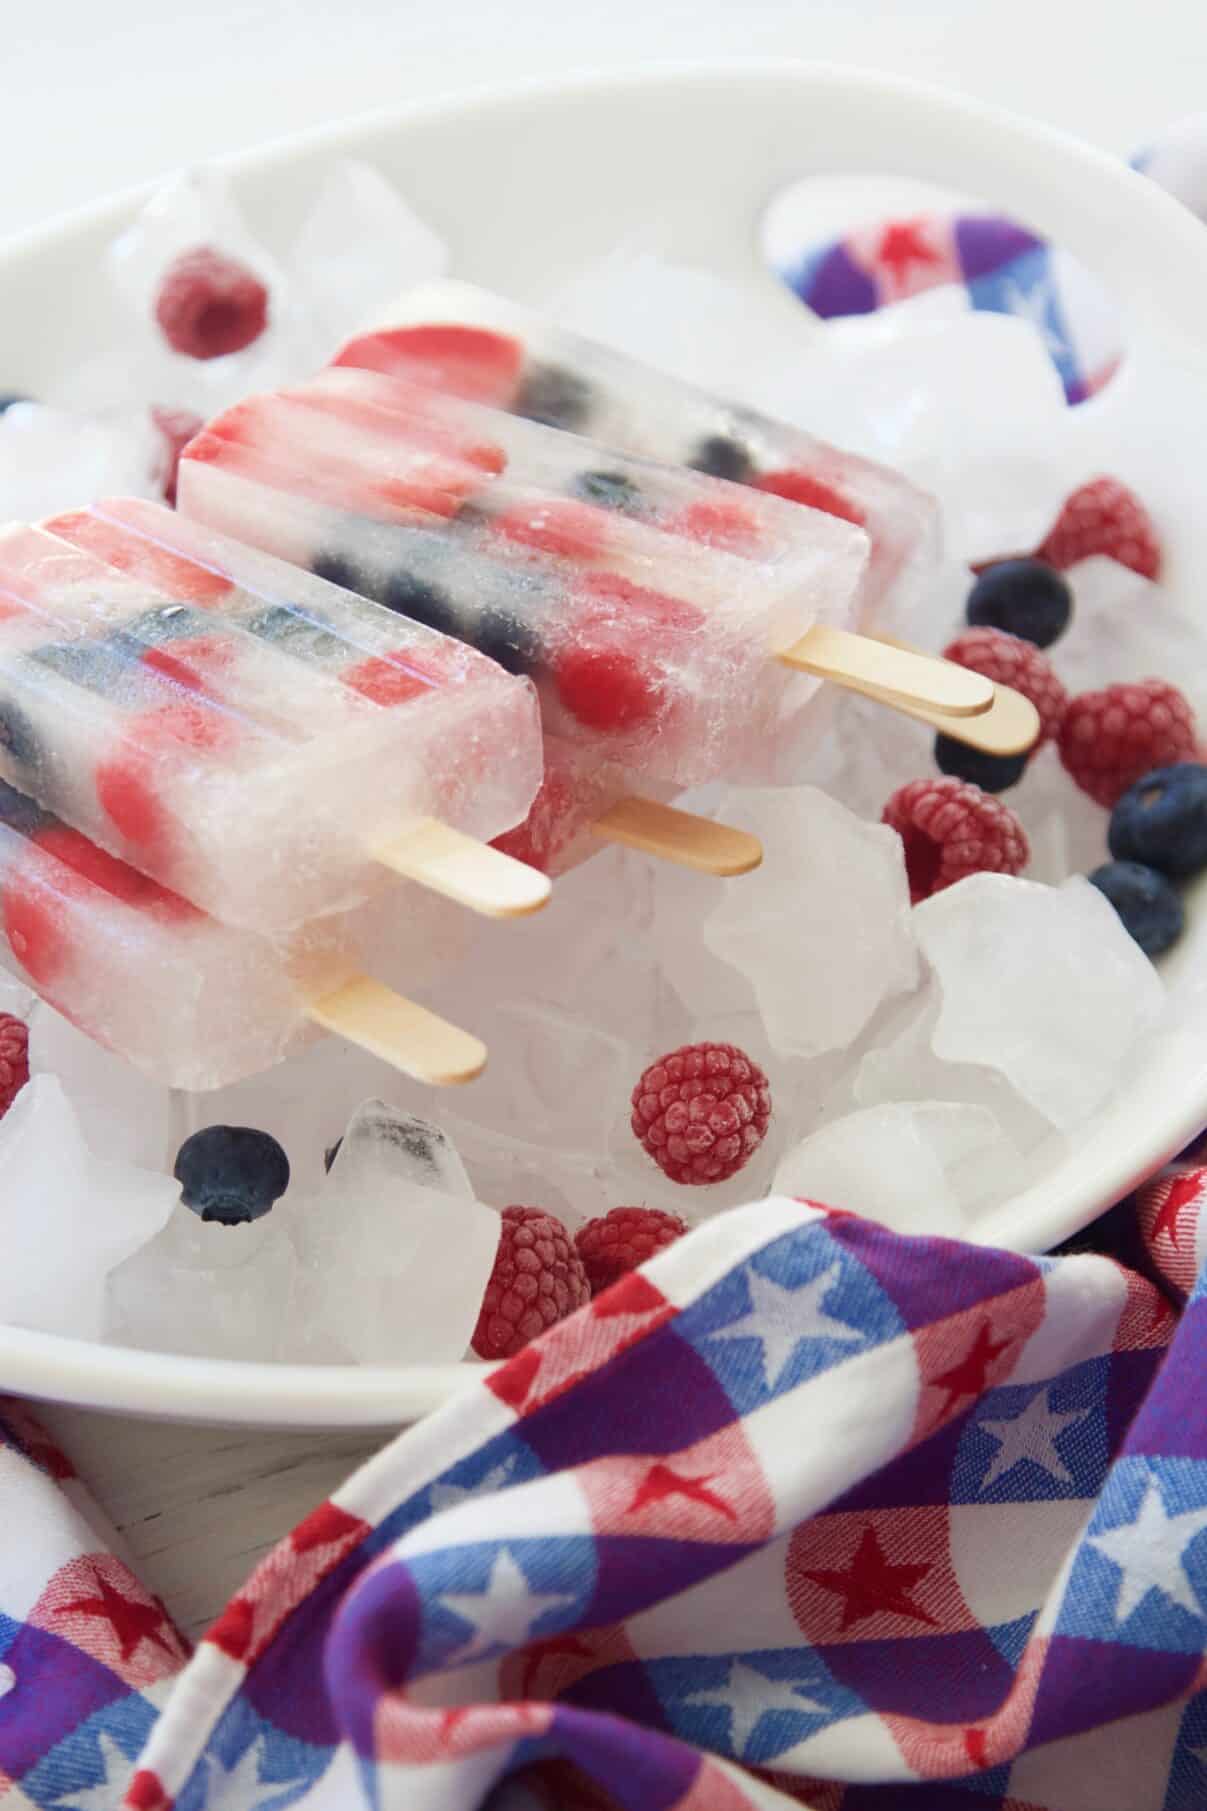 Frozen coconut water popsicles on a plate with berries and a July 4th towel. 